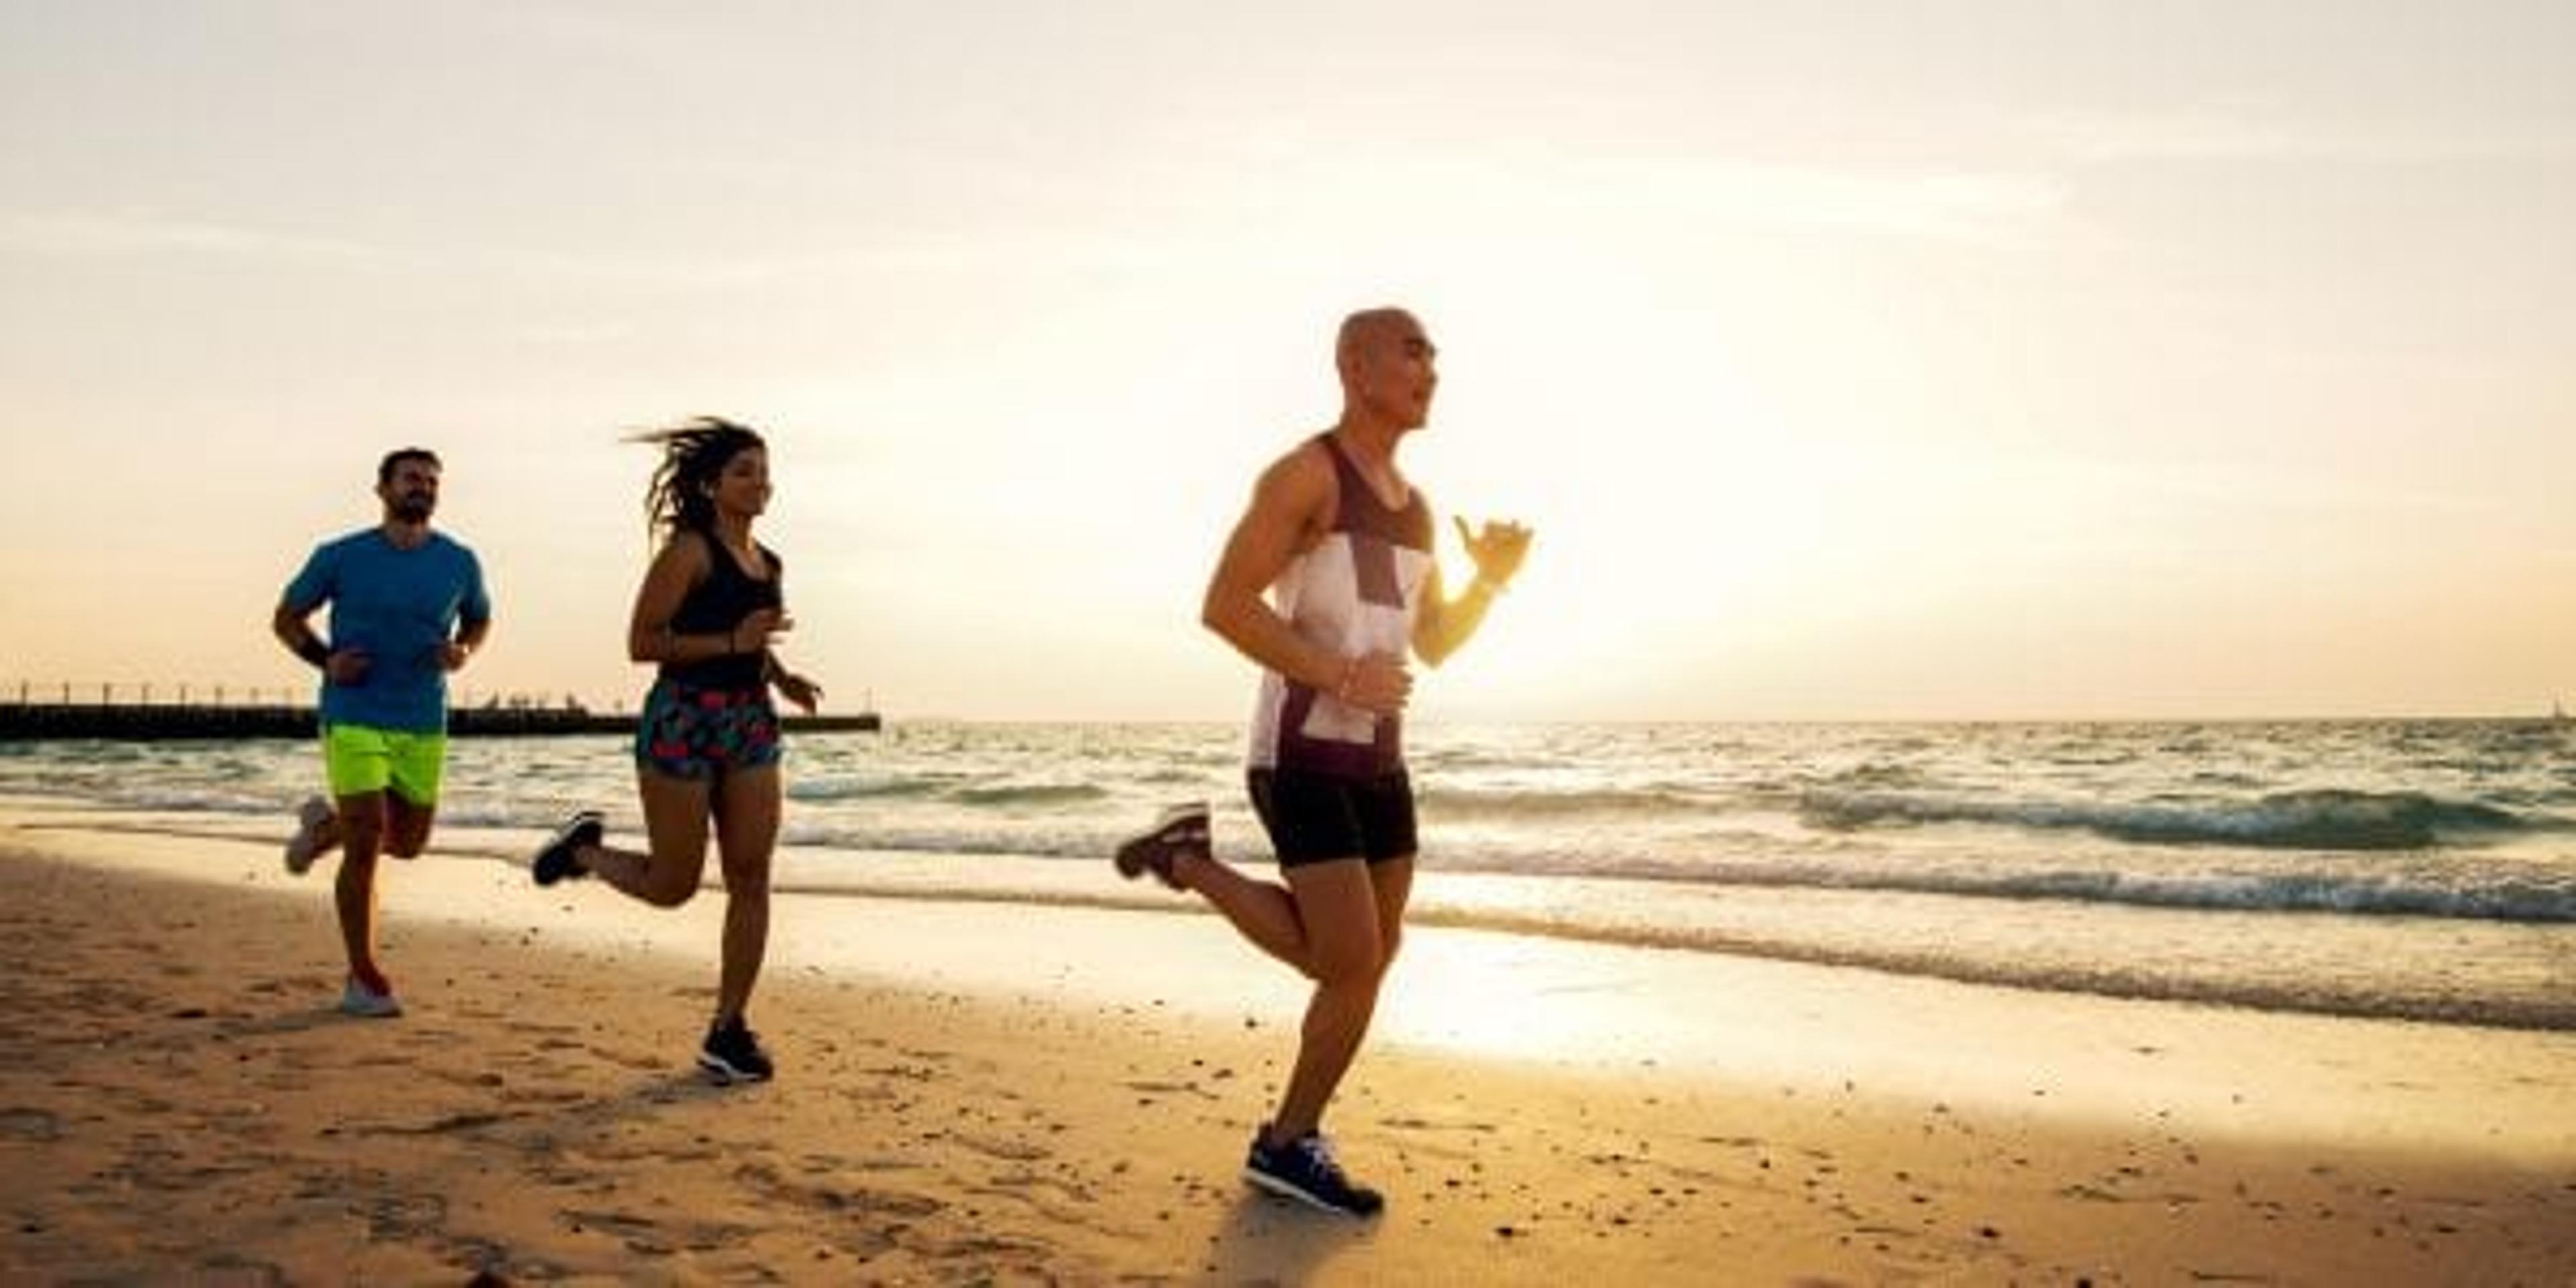 Group of sportive people running on the beach.